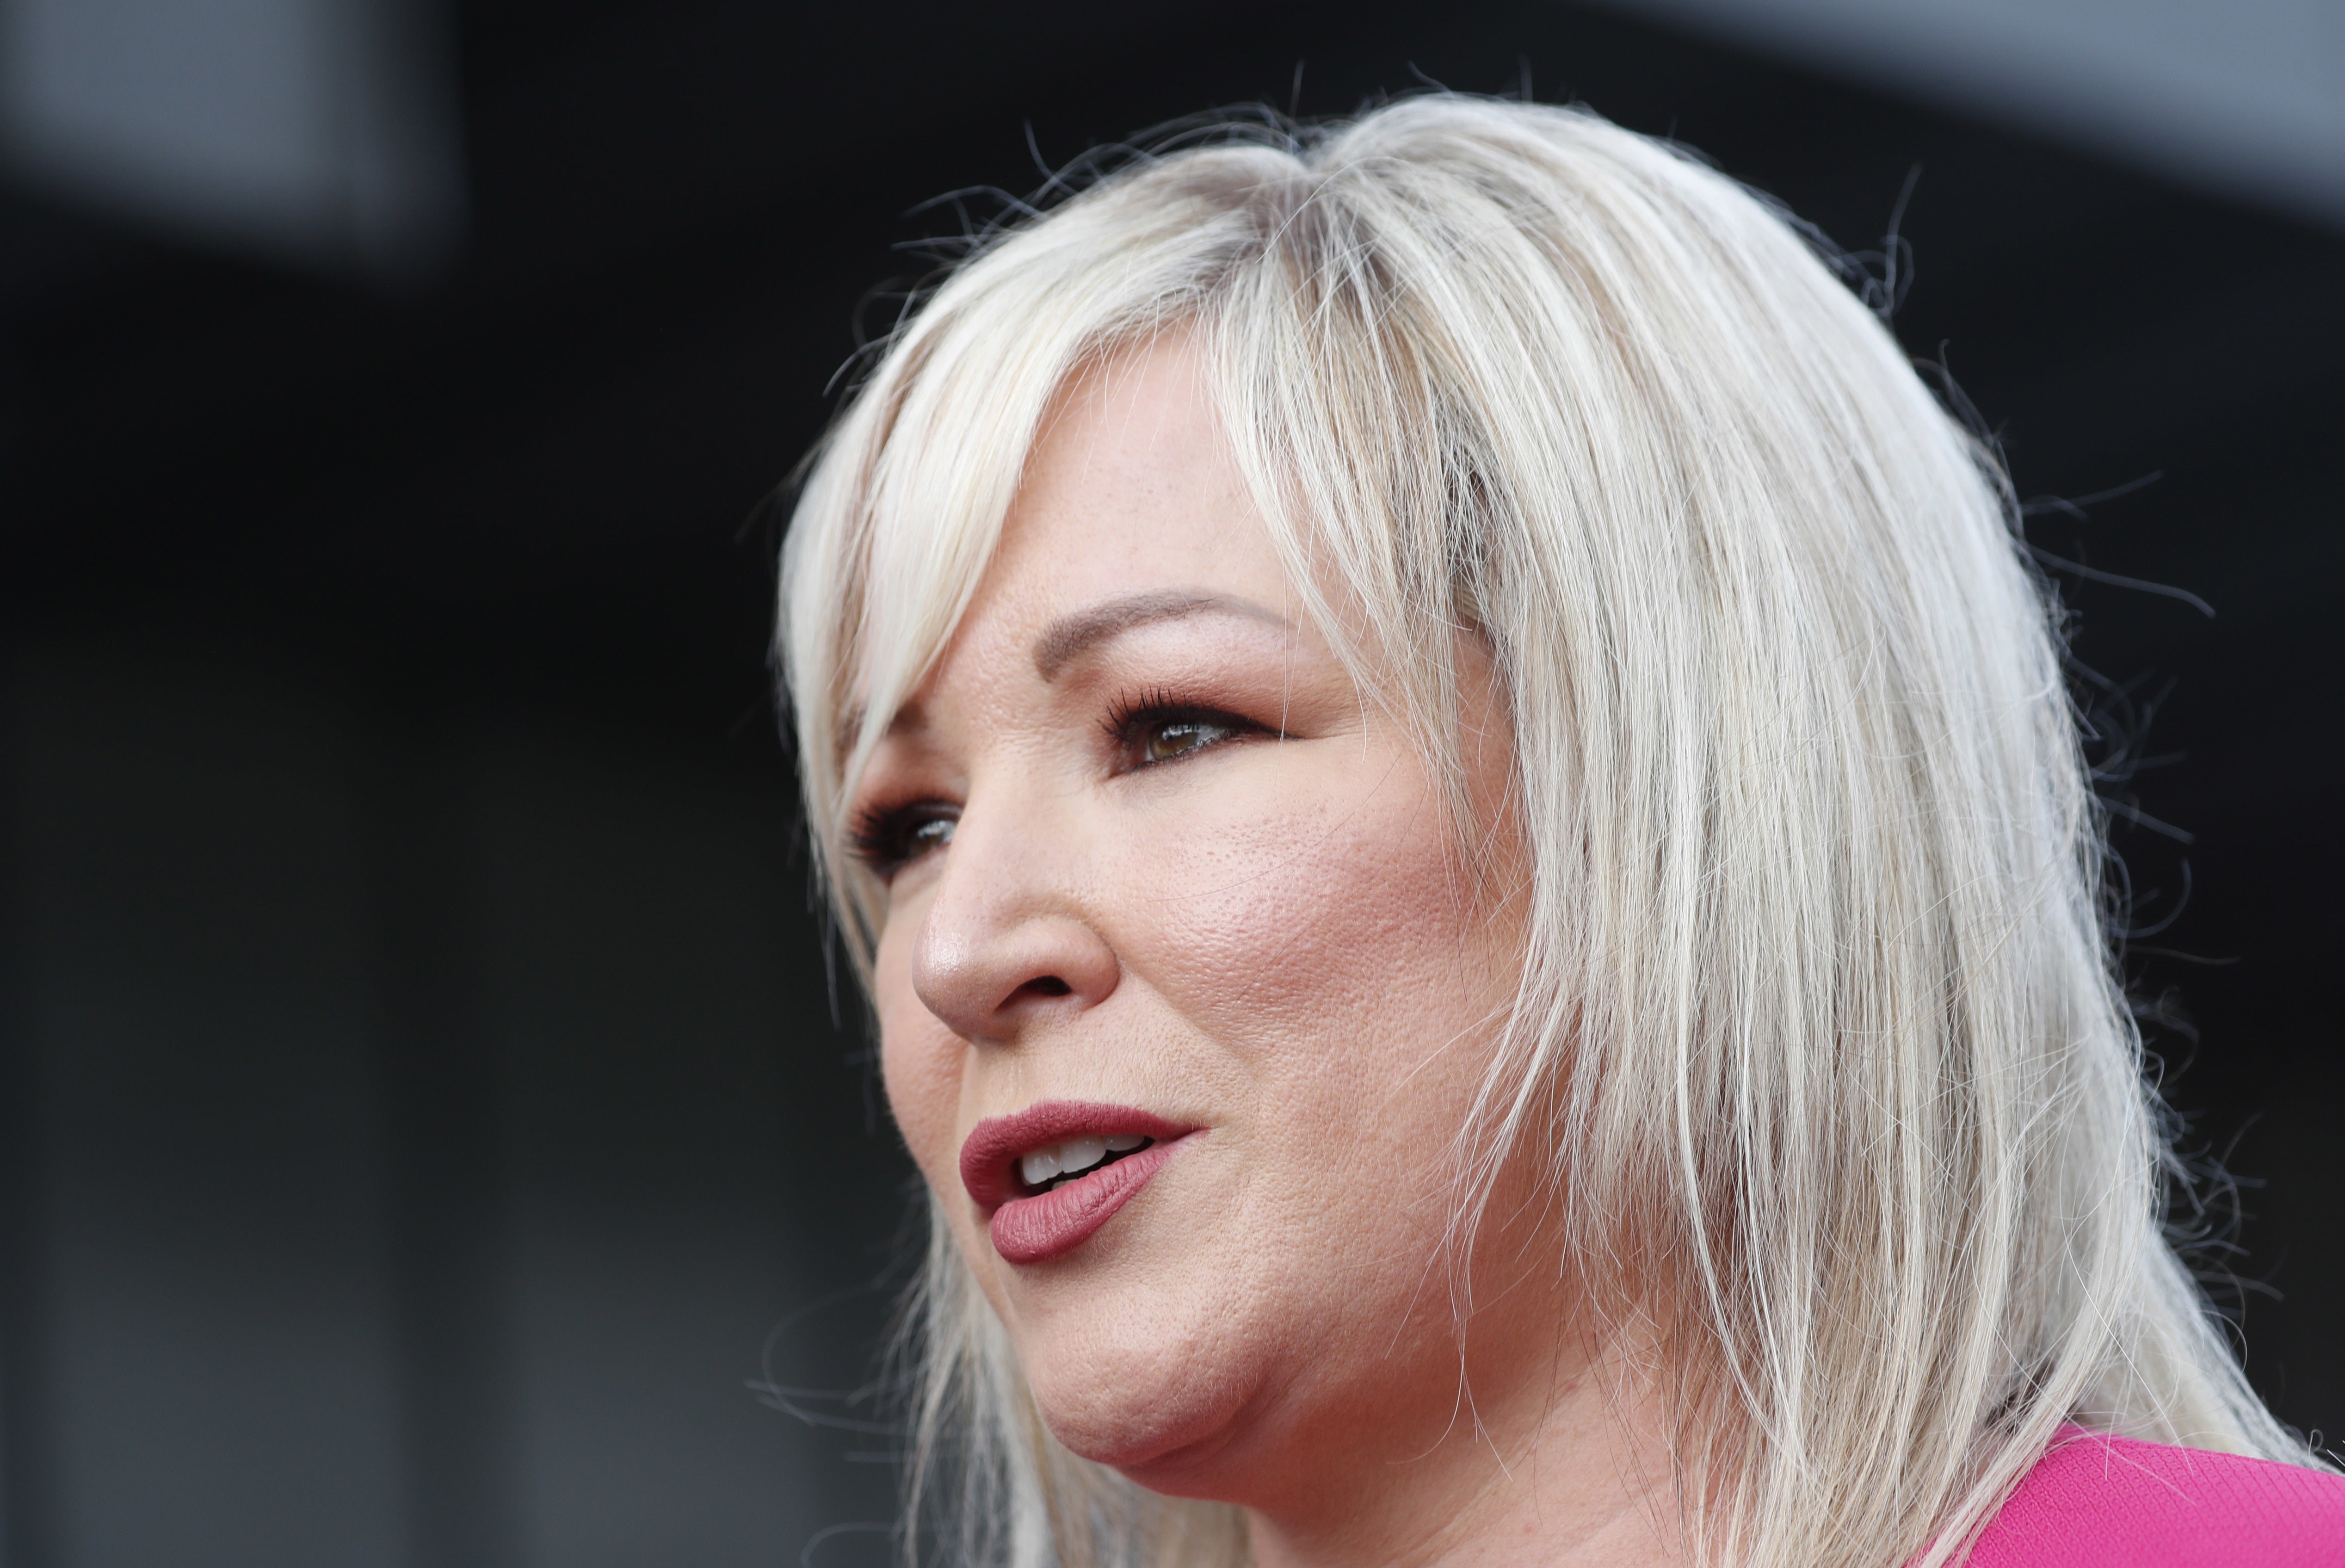 Sinn Fein vice-president Michelle O’Neill said the Queen’s family were grieving (Peter Morrison/PA)